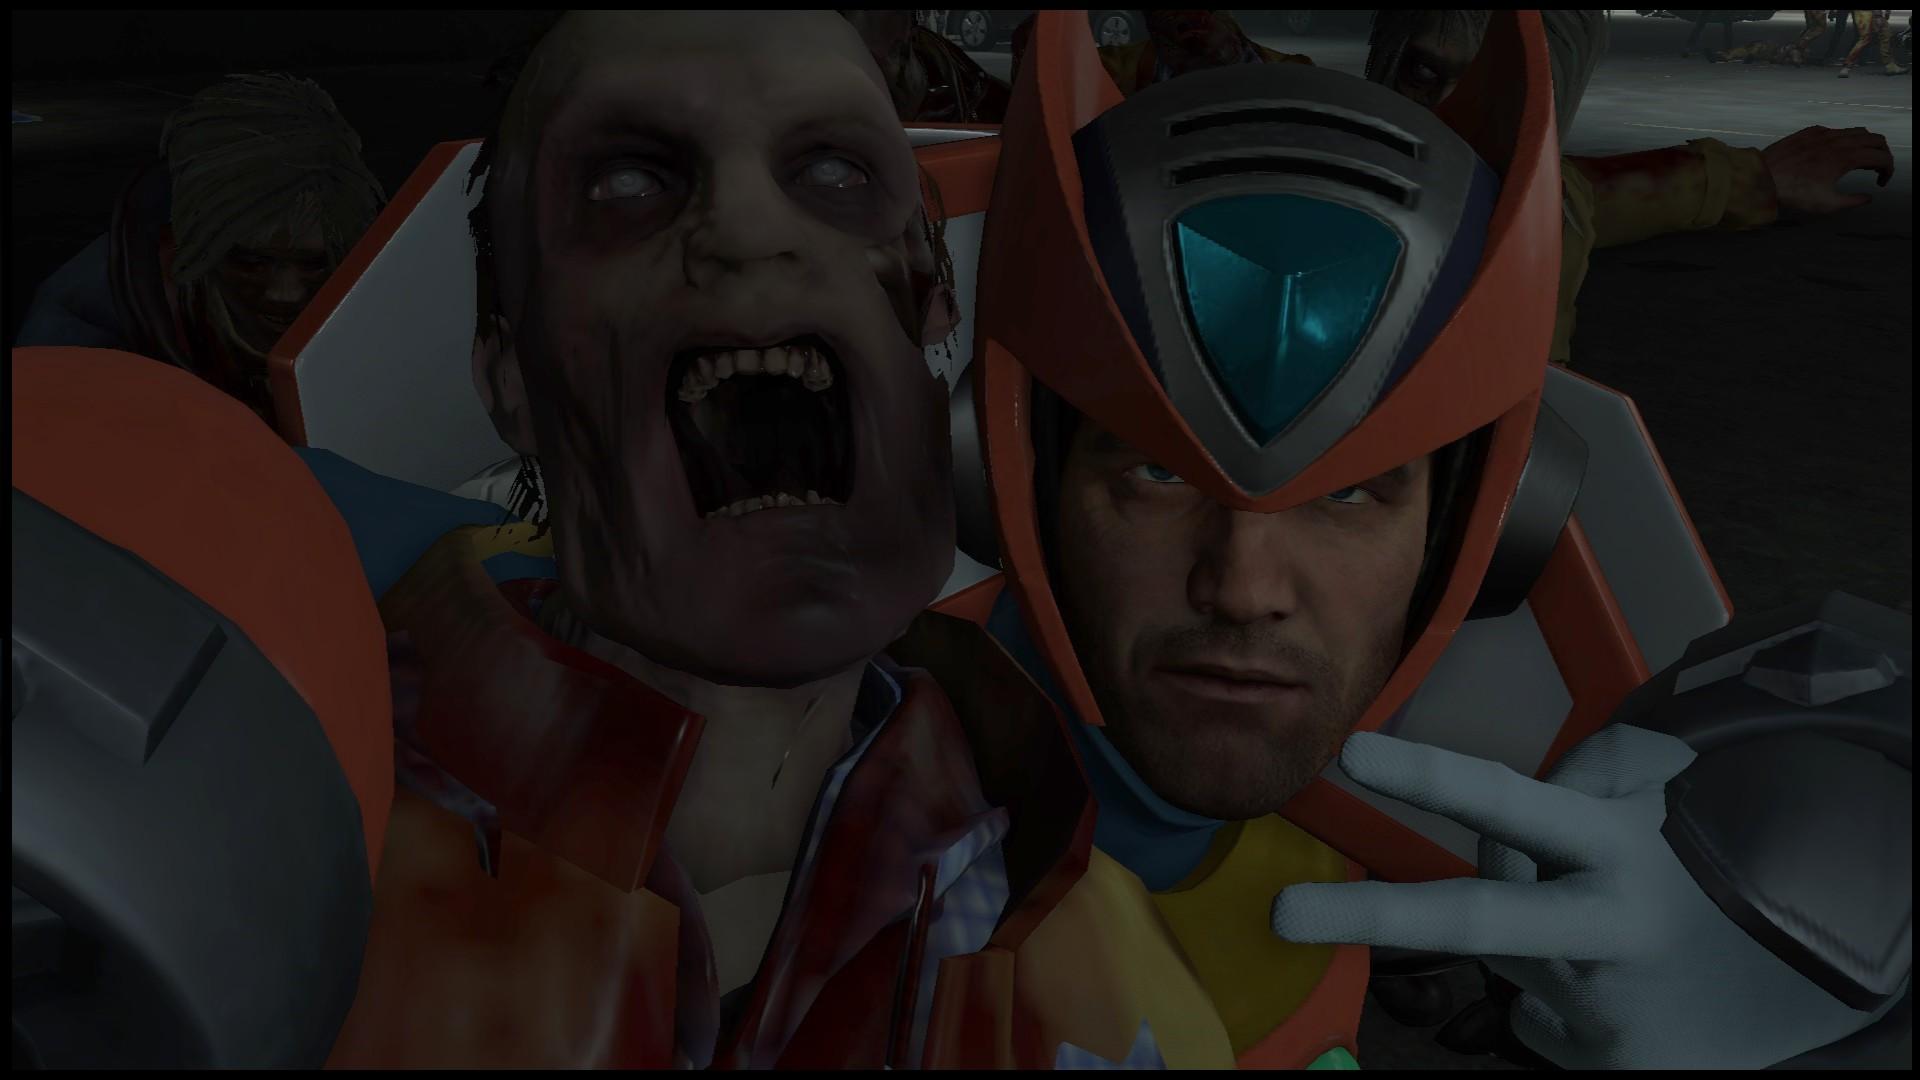 Dead Rising 4 Reviews, Pros and Cons